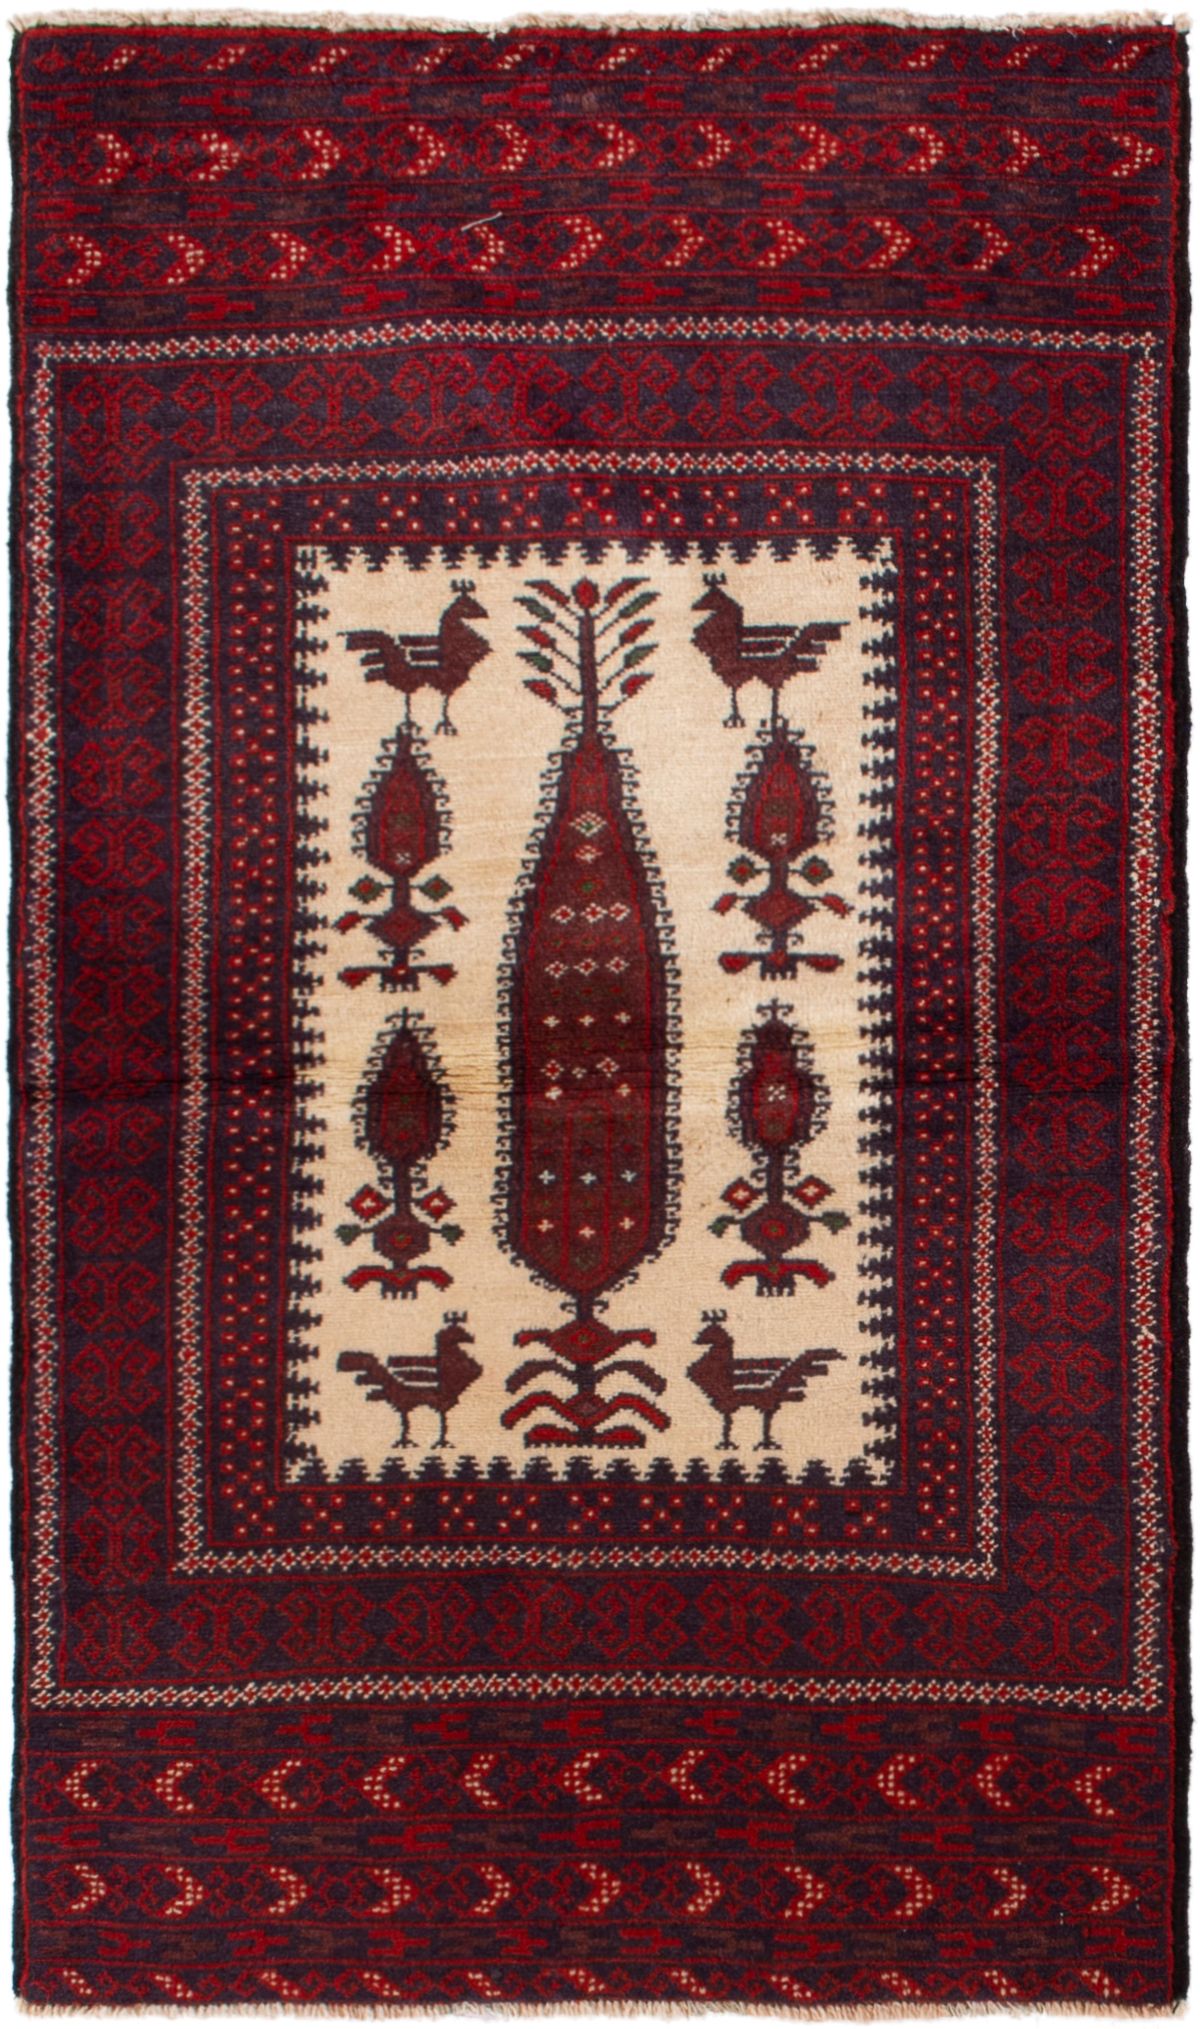 Hand-knotted Finest Baluch  Wool Rug 2'9" x 4'9" Size: 2'9" x 4'9"  